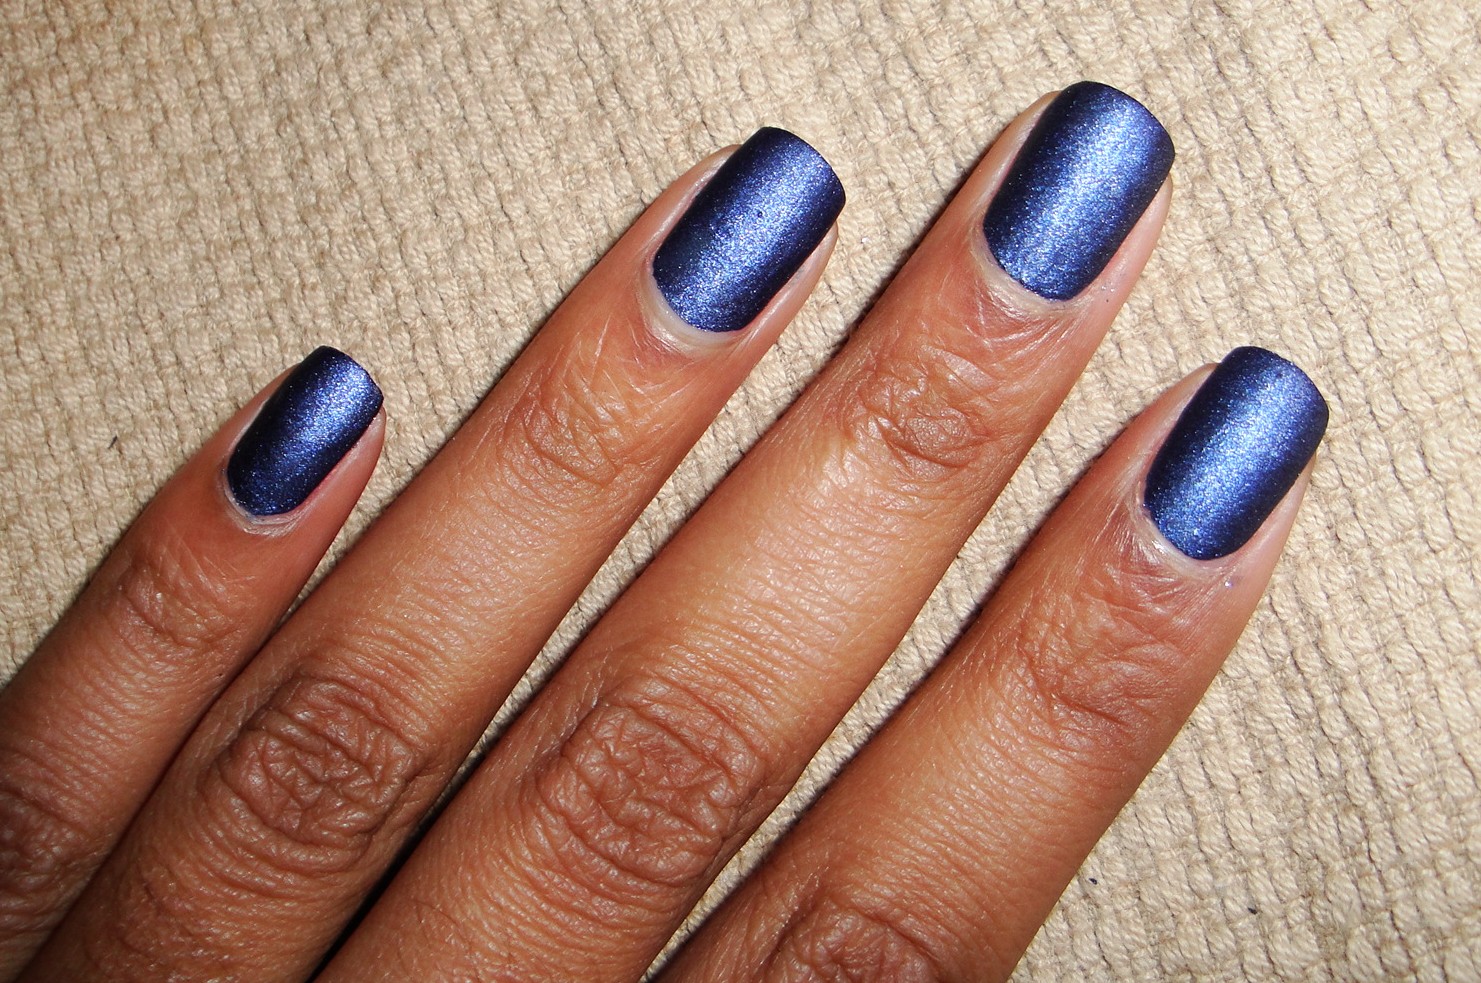 3. OPI Russian Navy - wide 4